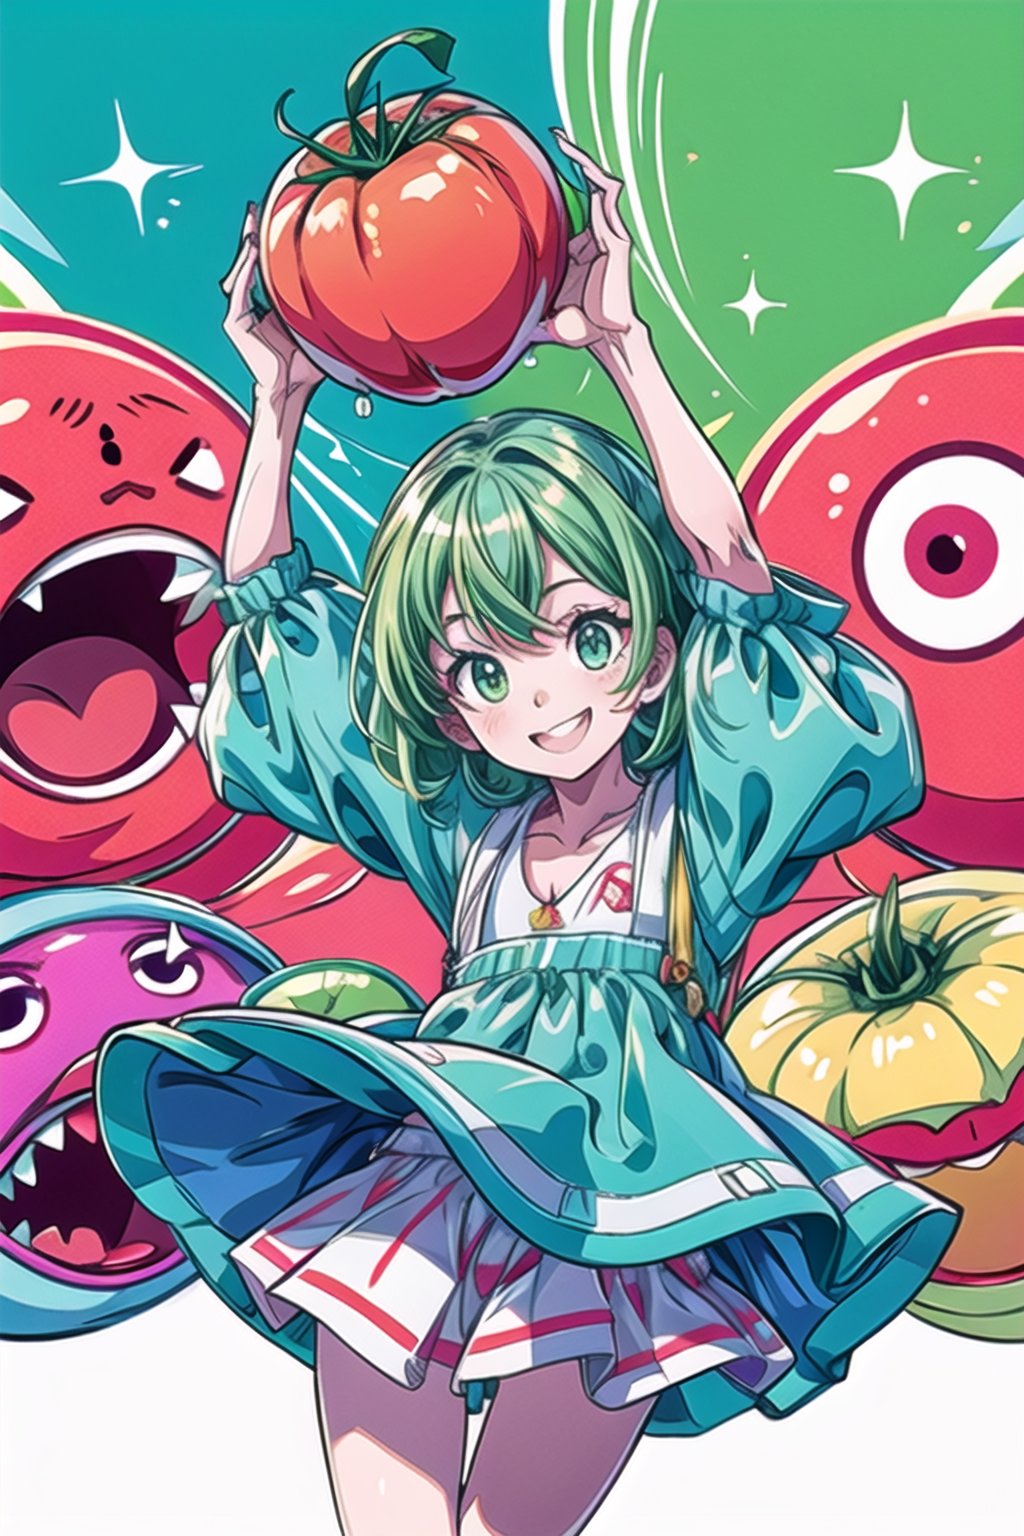 master piece, Cute, tomato, monster, cute character, vivid colour, Energetic, Sparkling eyes, green color, Cheerful smile